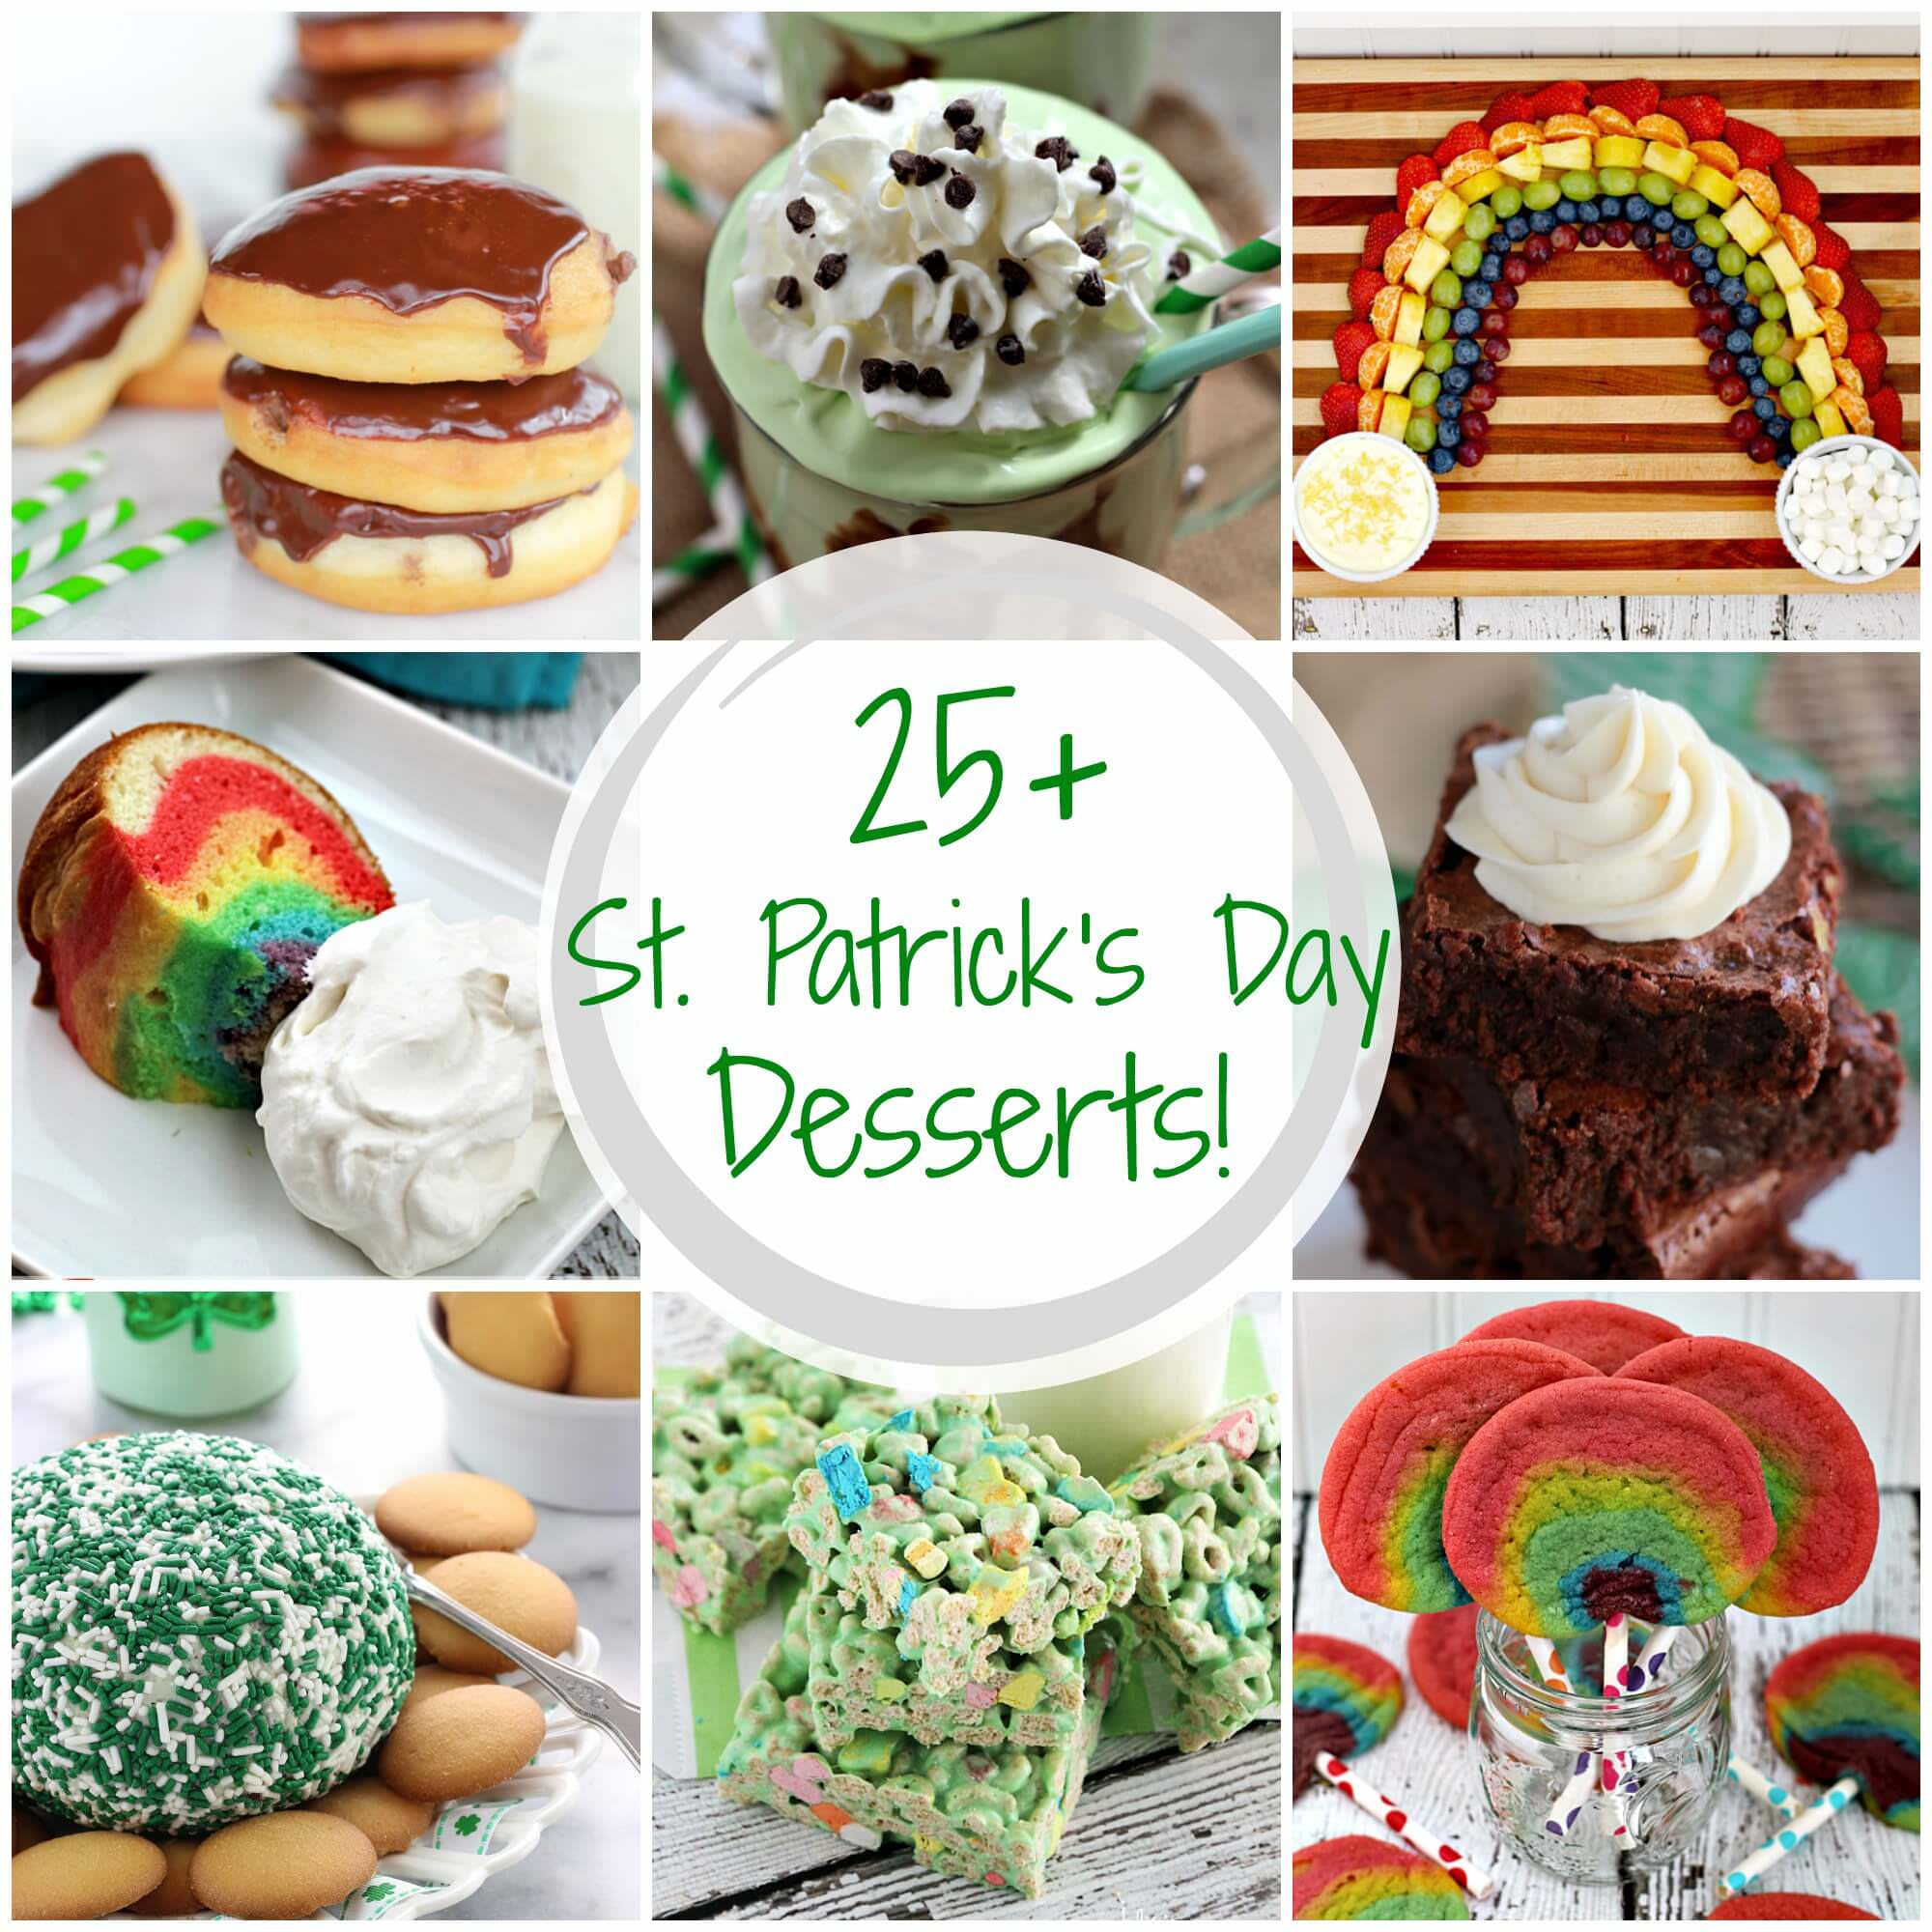 Healthy St Patrick'S Day Desserts
 The top 22 Ideas About St Patrick s Recipes Desserts